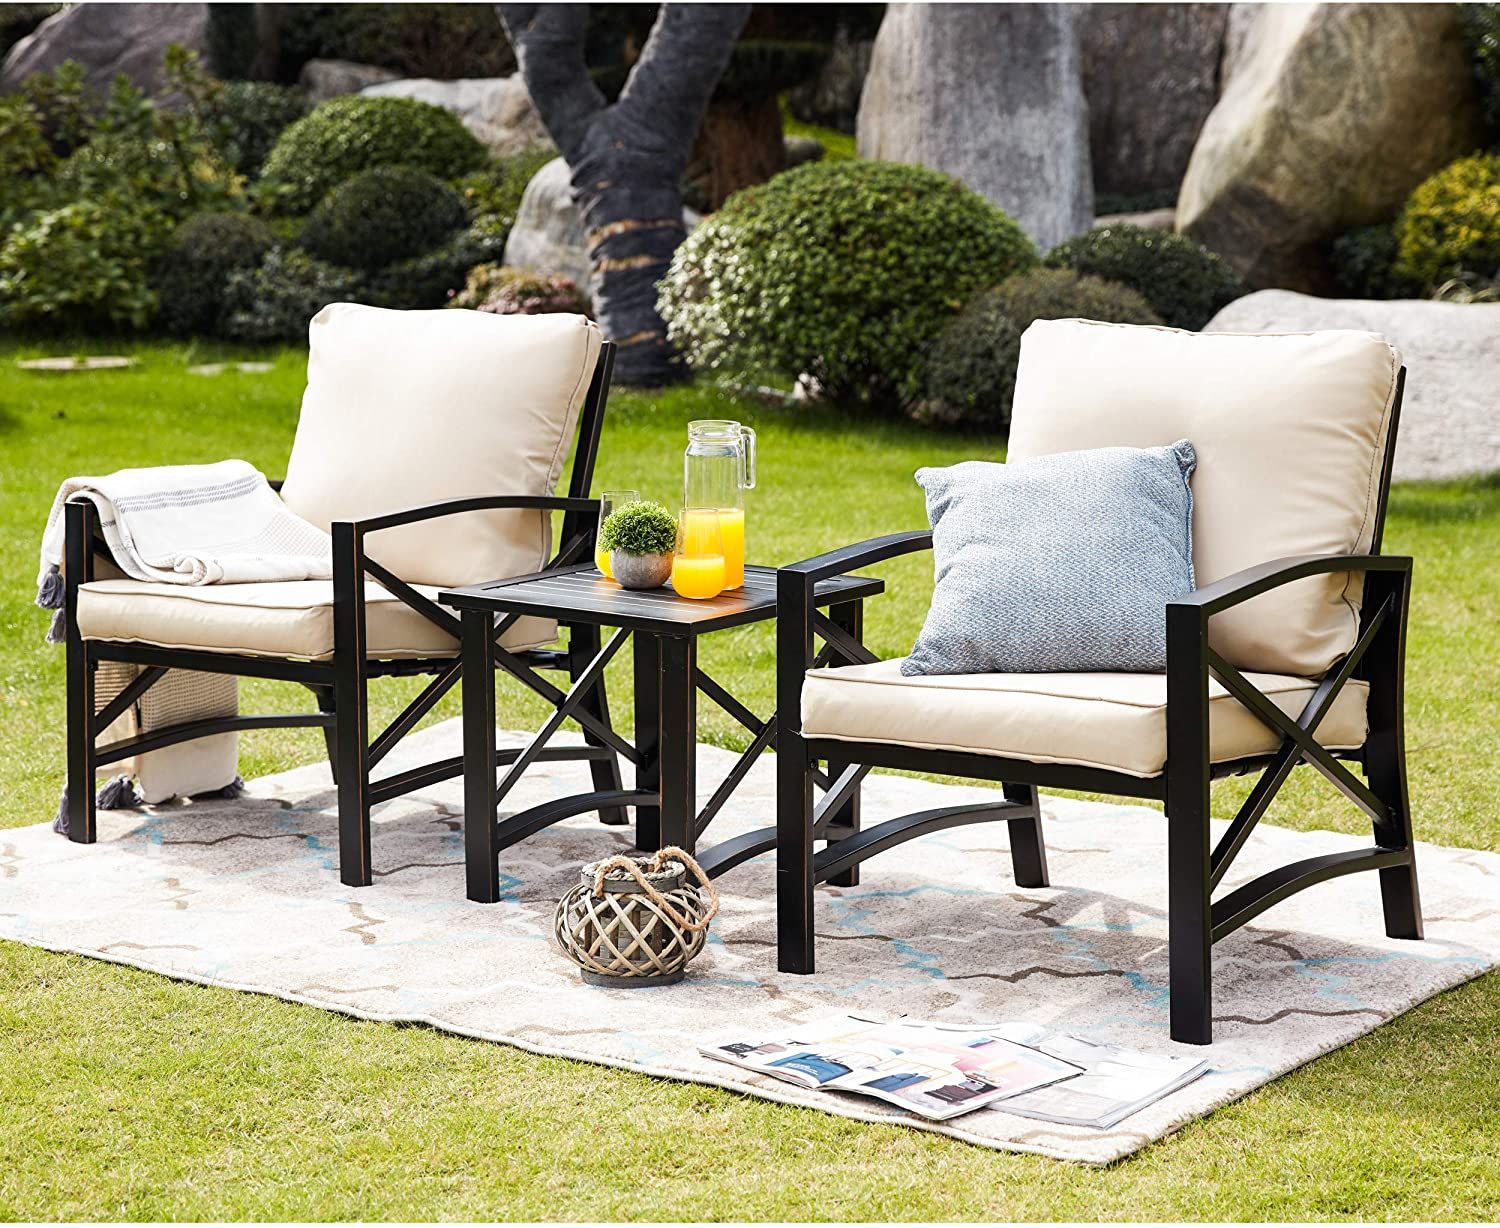 8 Best Patio Furniture Sets 2021 The Strategist - Budget Patio Dining Sets